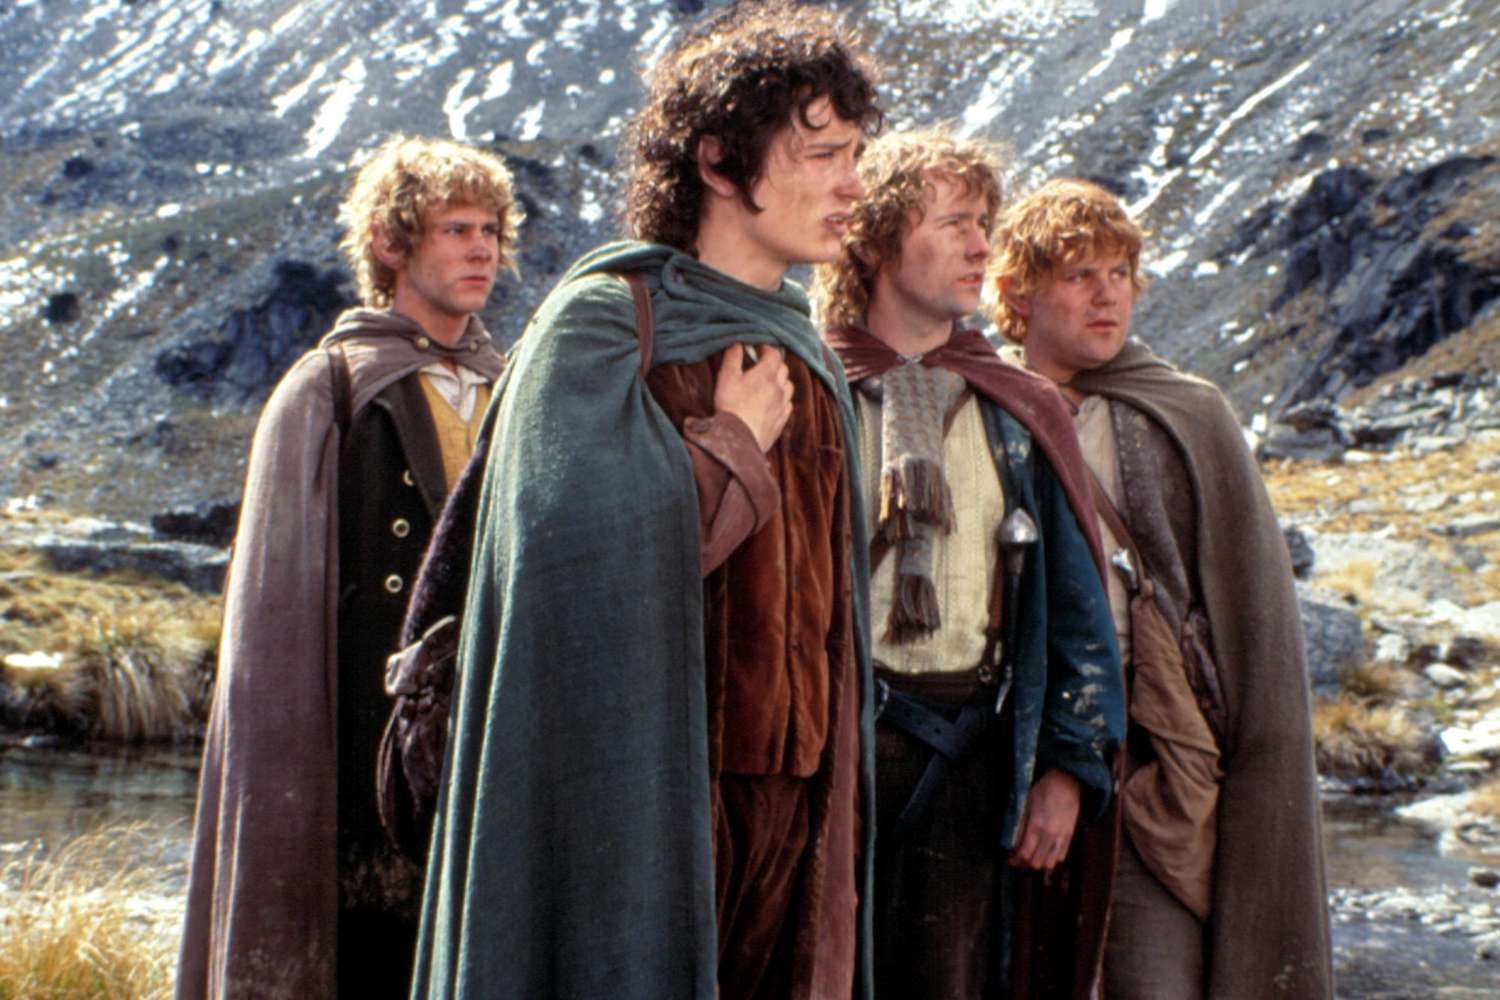 Warner Bros. announces new ‘Lord of the Rings’ movies are coming